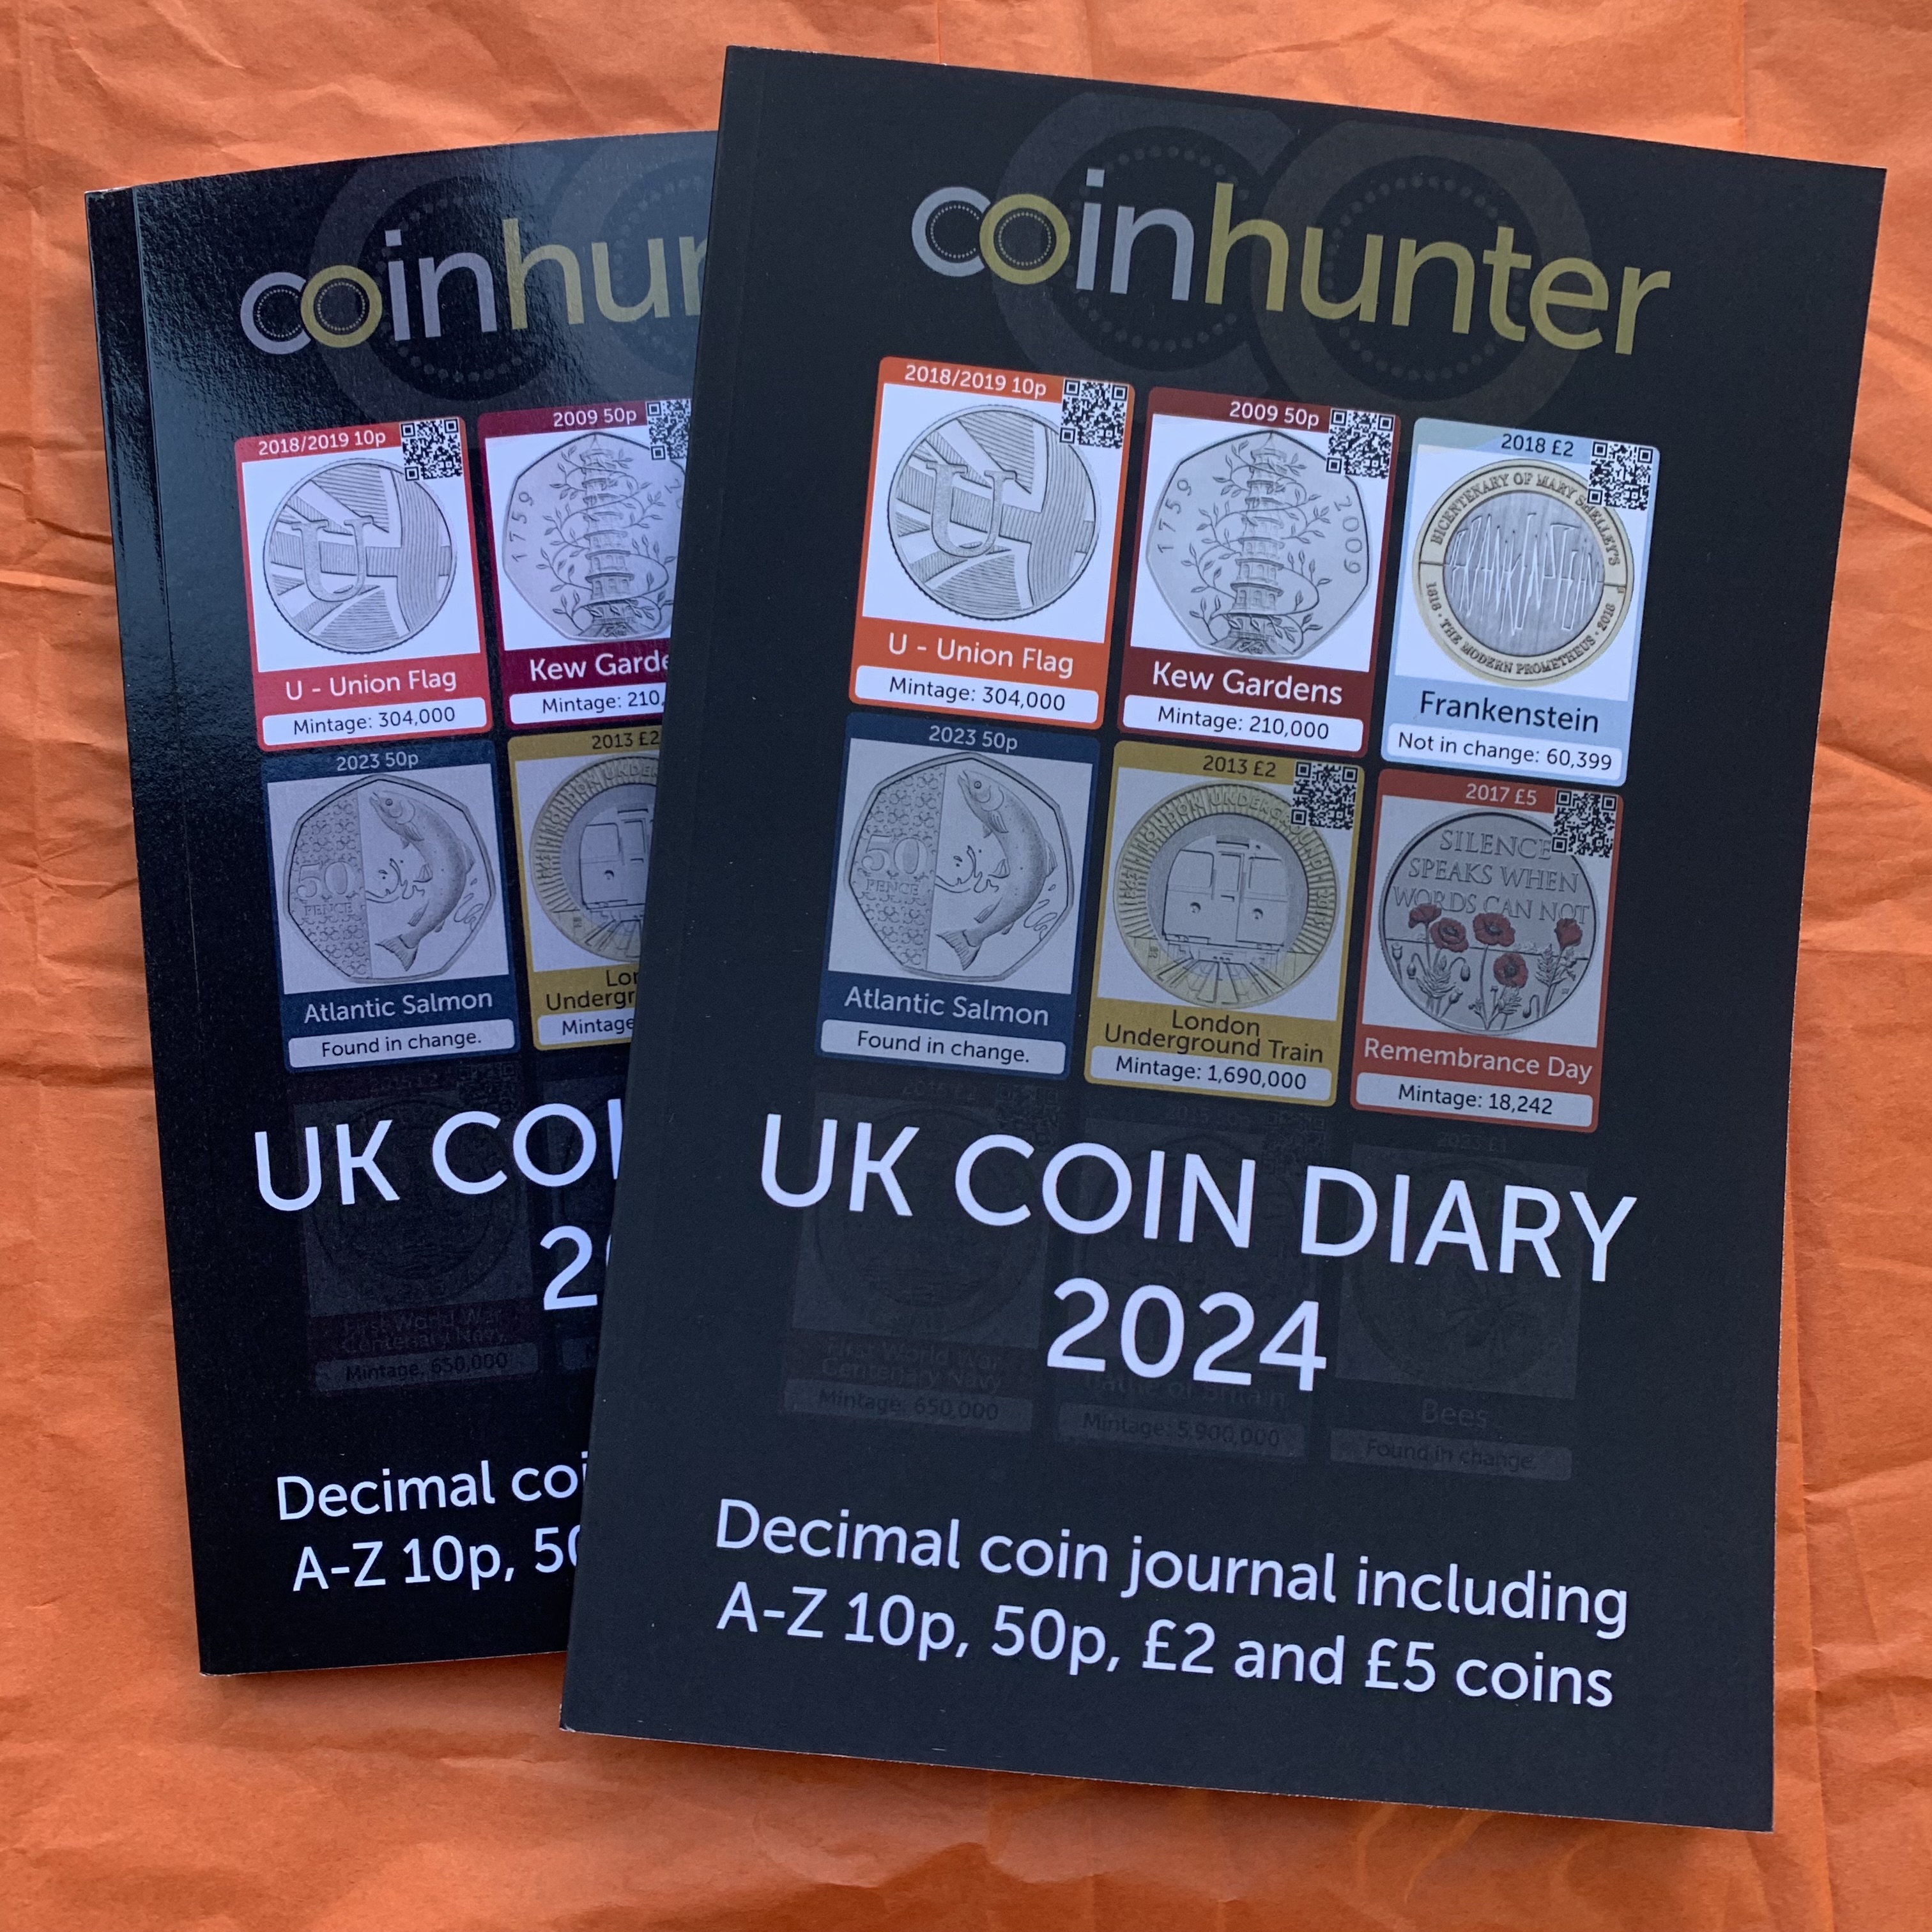 UK COIN DIARY 2024: Size Compare